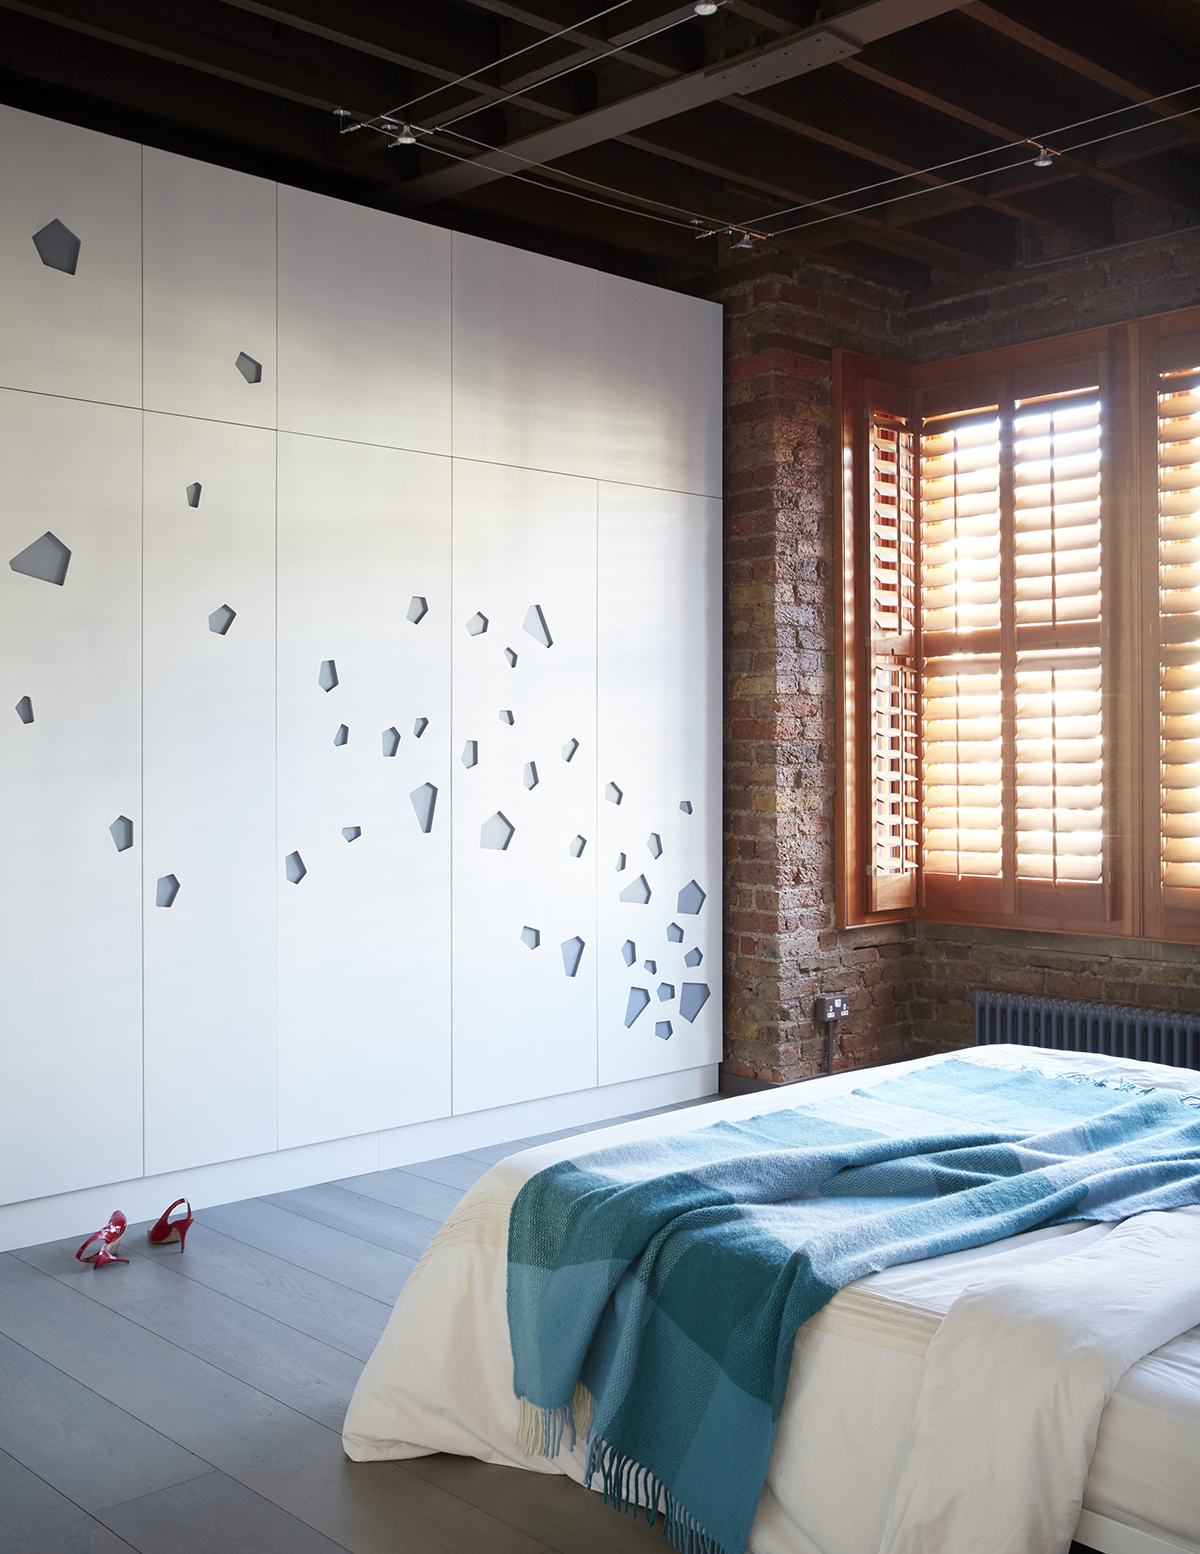 built in wardrobes with recessed handles in dandelion pattern